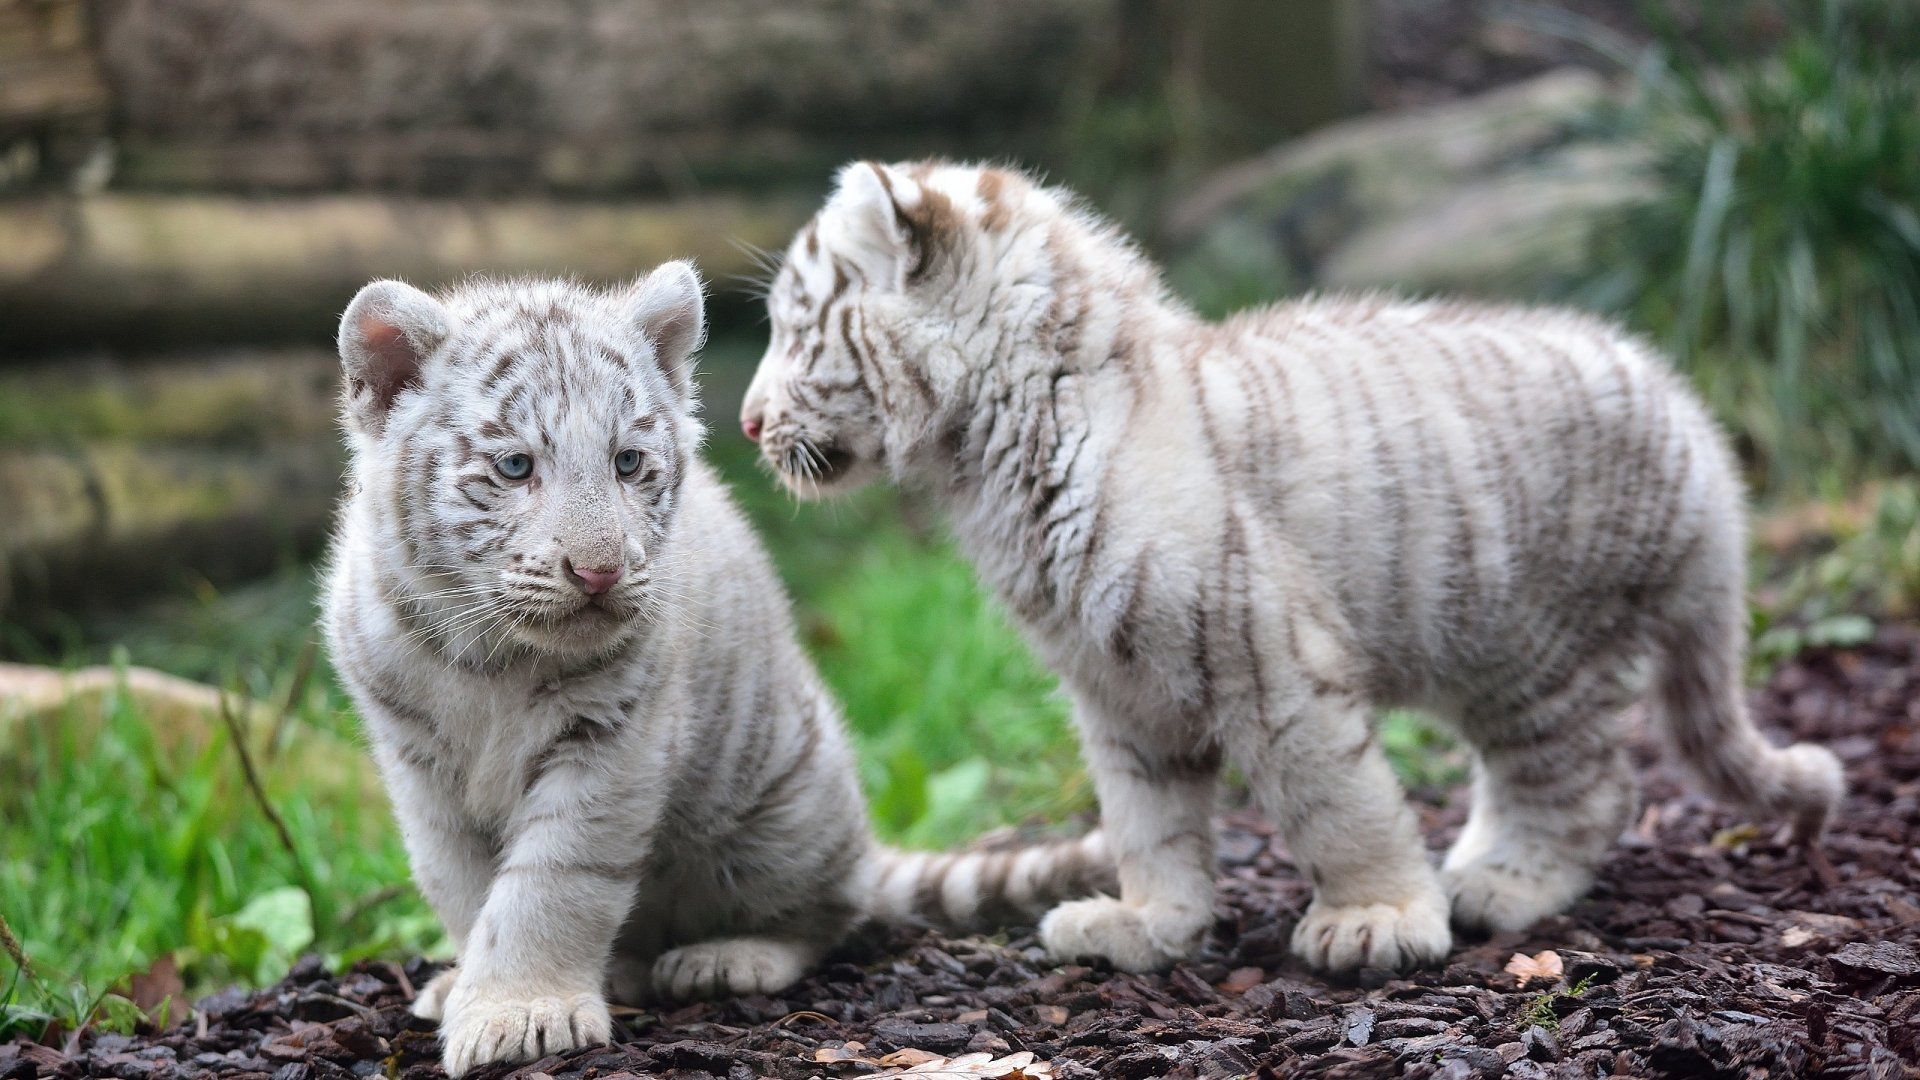 White Tiger Hd Wallpapers 1080p - Tiger Pic Baby White , HD Wallpaper & Backgrounds